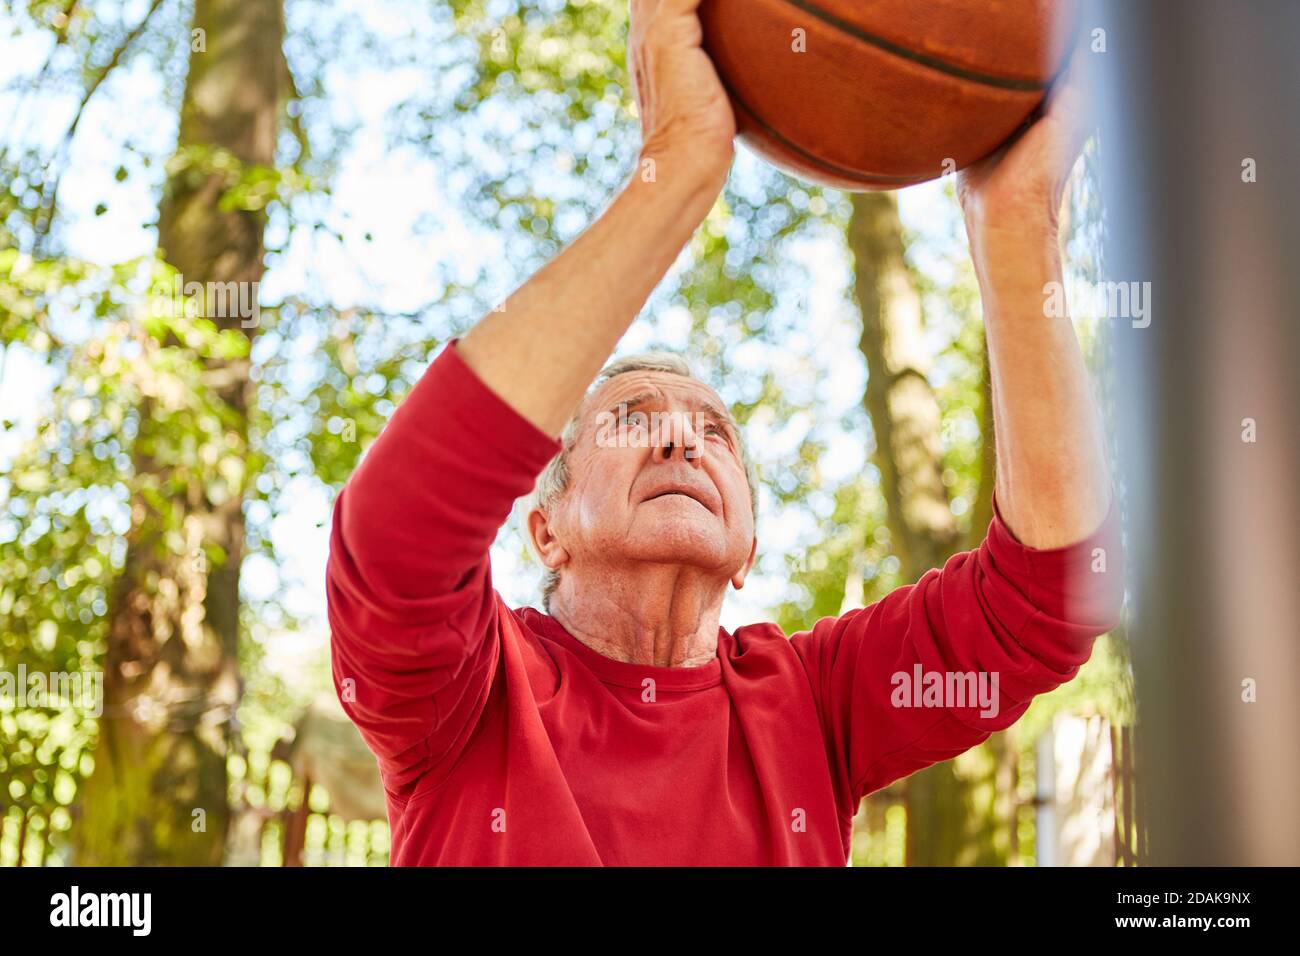 Sporty and concentrated senior with ball while playing basketball before the free throw Stock Photo